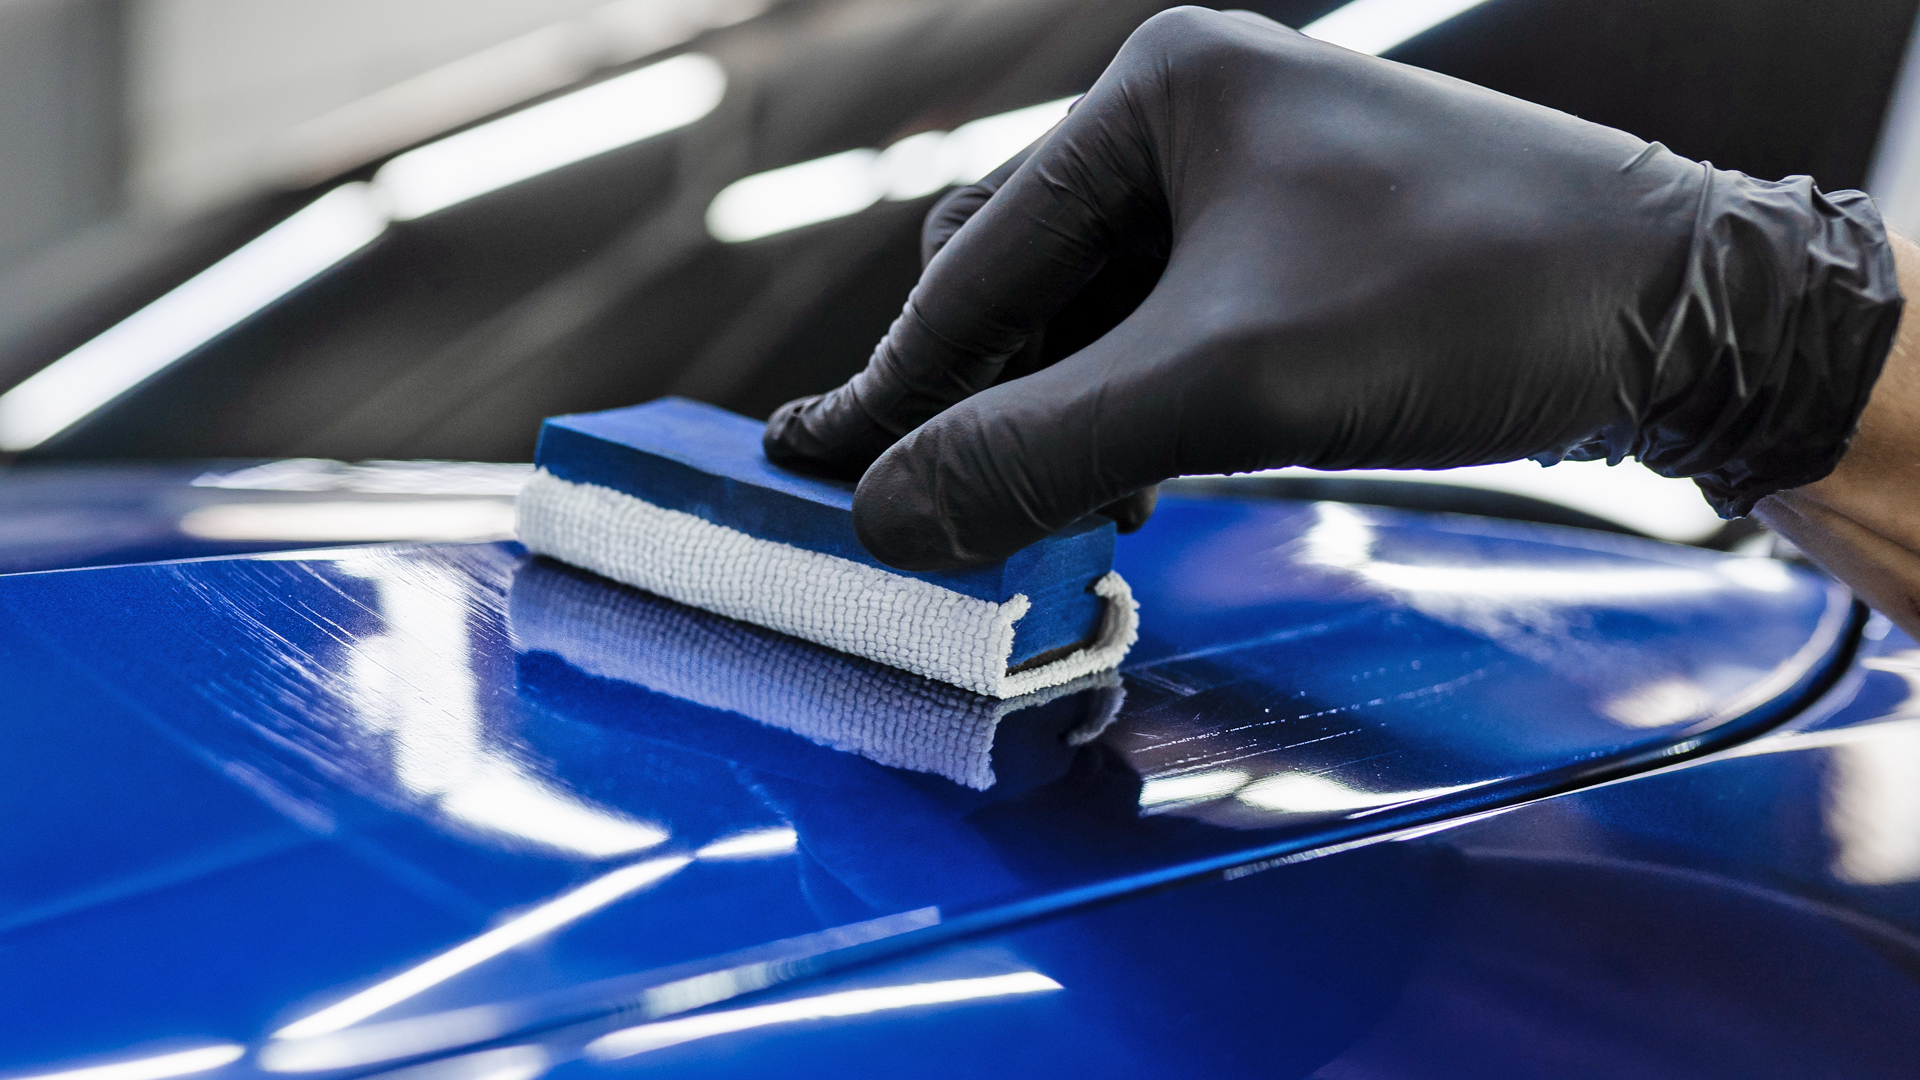 What Is Ceramic Coating, and Why Should You Use It for Car Cleaning?